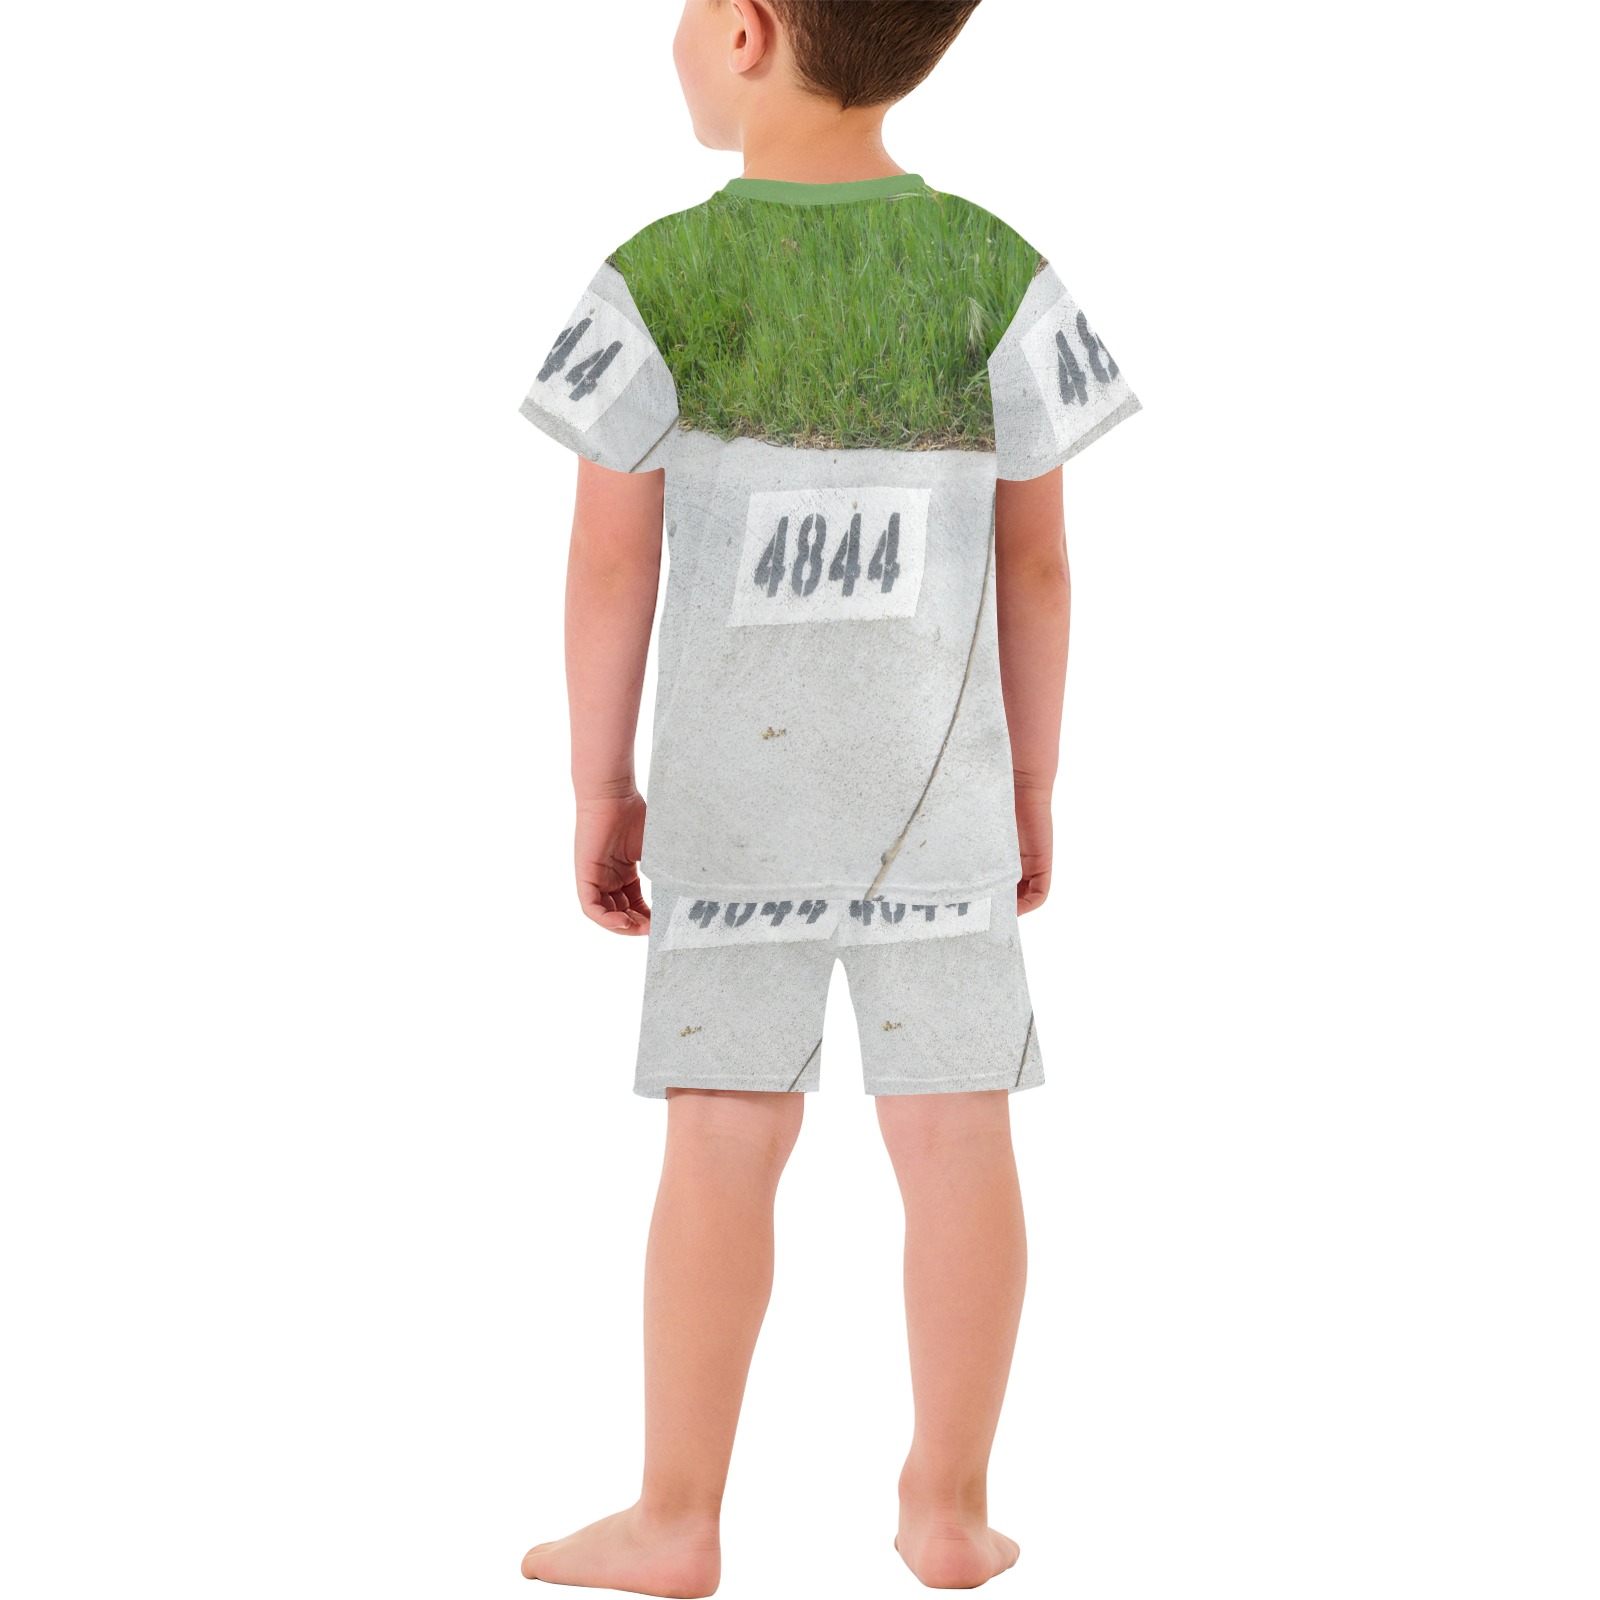 Street Number 4844 with Green Collar Little Boys' Short Pajama Set